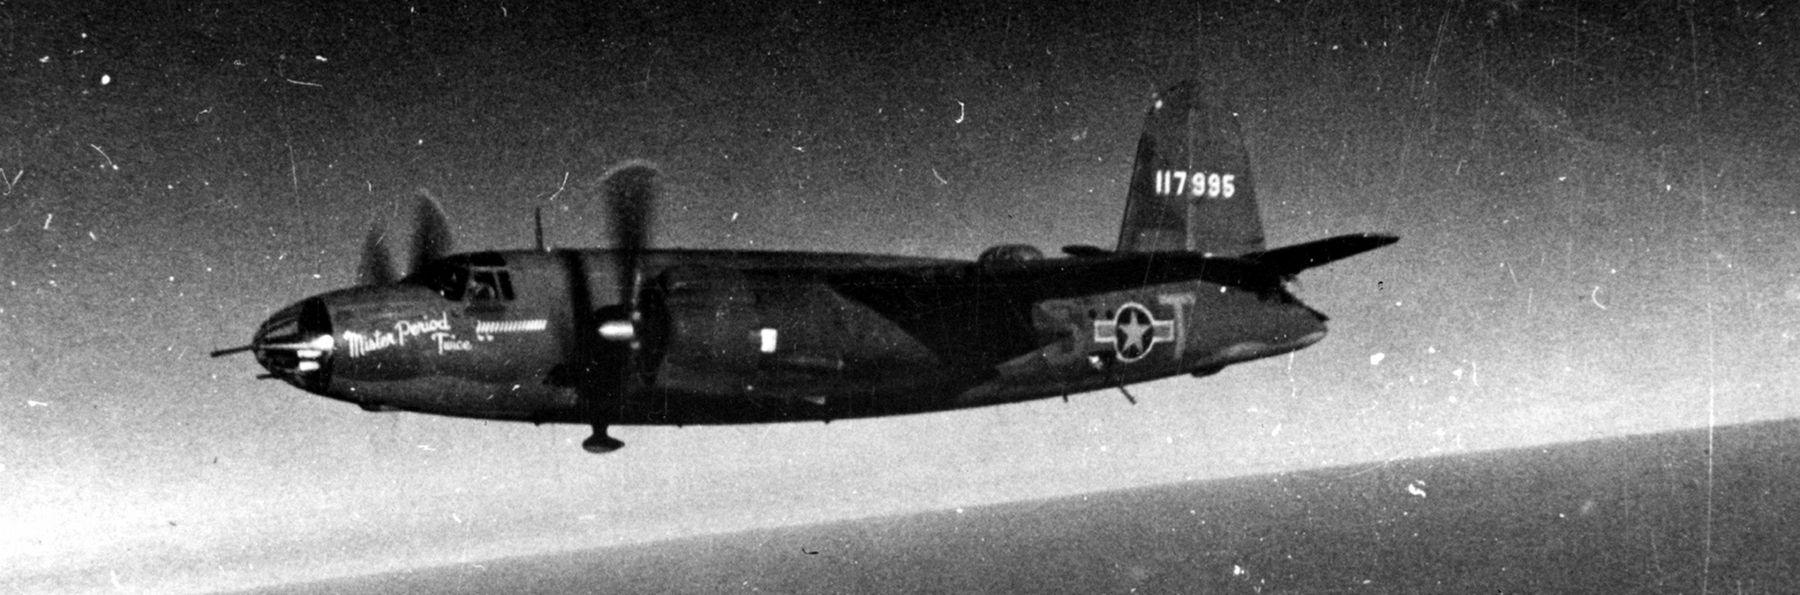 B-26 Marauder ((SS-T, s/n 41-17995) "Mister Period Twice" of the 451st Bomb Squadron, 322nd Bomb Gro image. Click for full size.